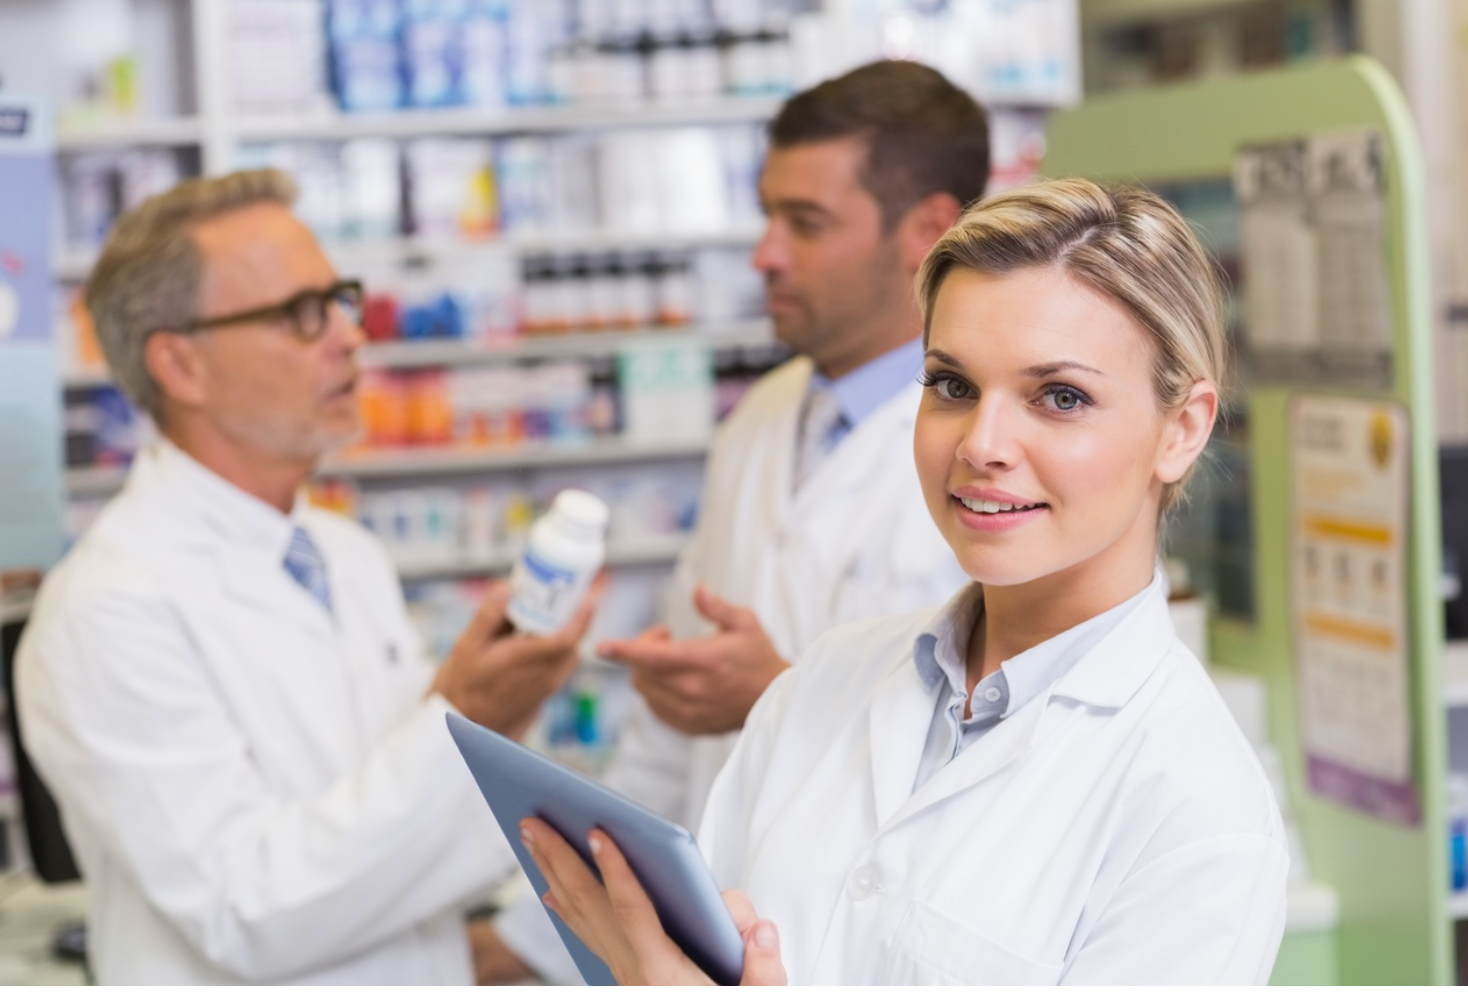 Three Ways Community Pharmacies Can Partner With Academia to Implement Patient Care Initiatives